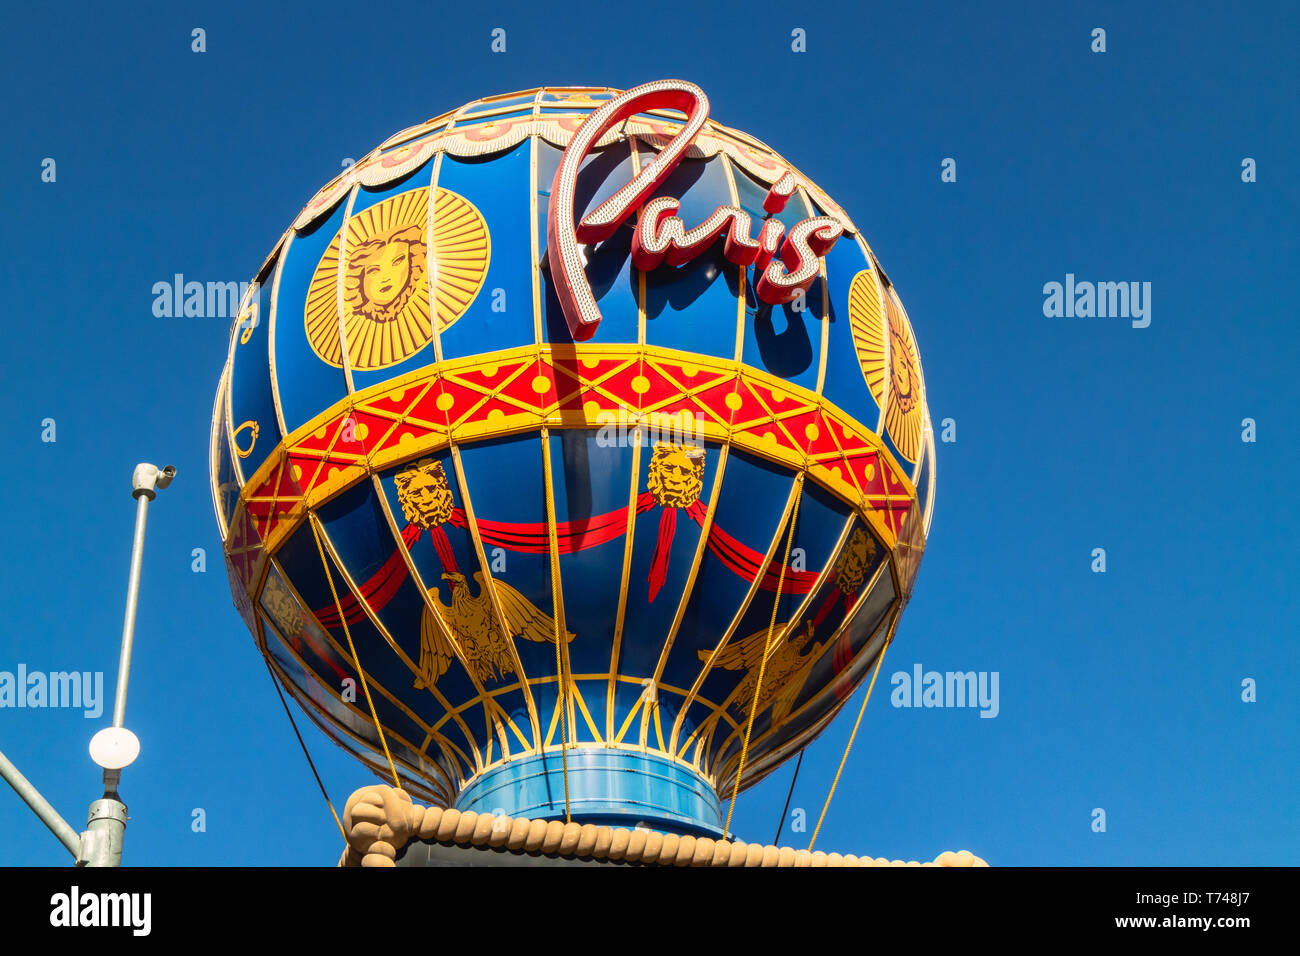 Montgolfier Balloon With The Theme of Paris at Paris Hotel and Casino, Las Vegas, November 19, 2016 Stock Photo